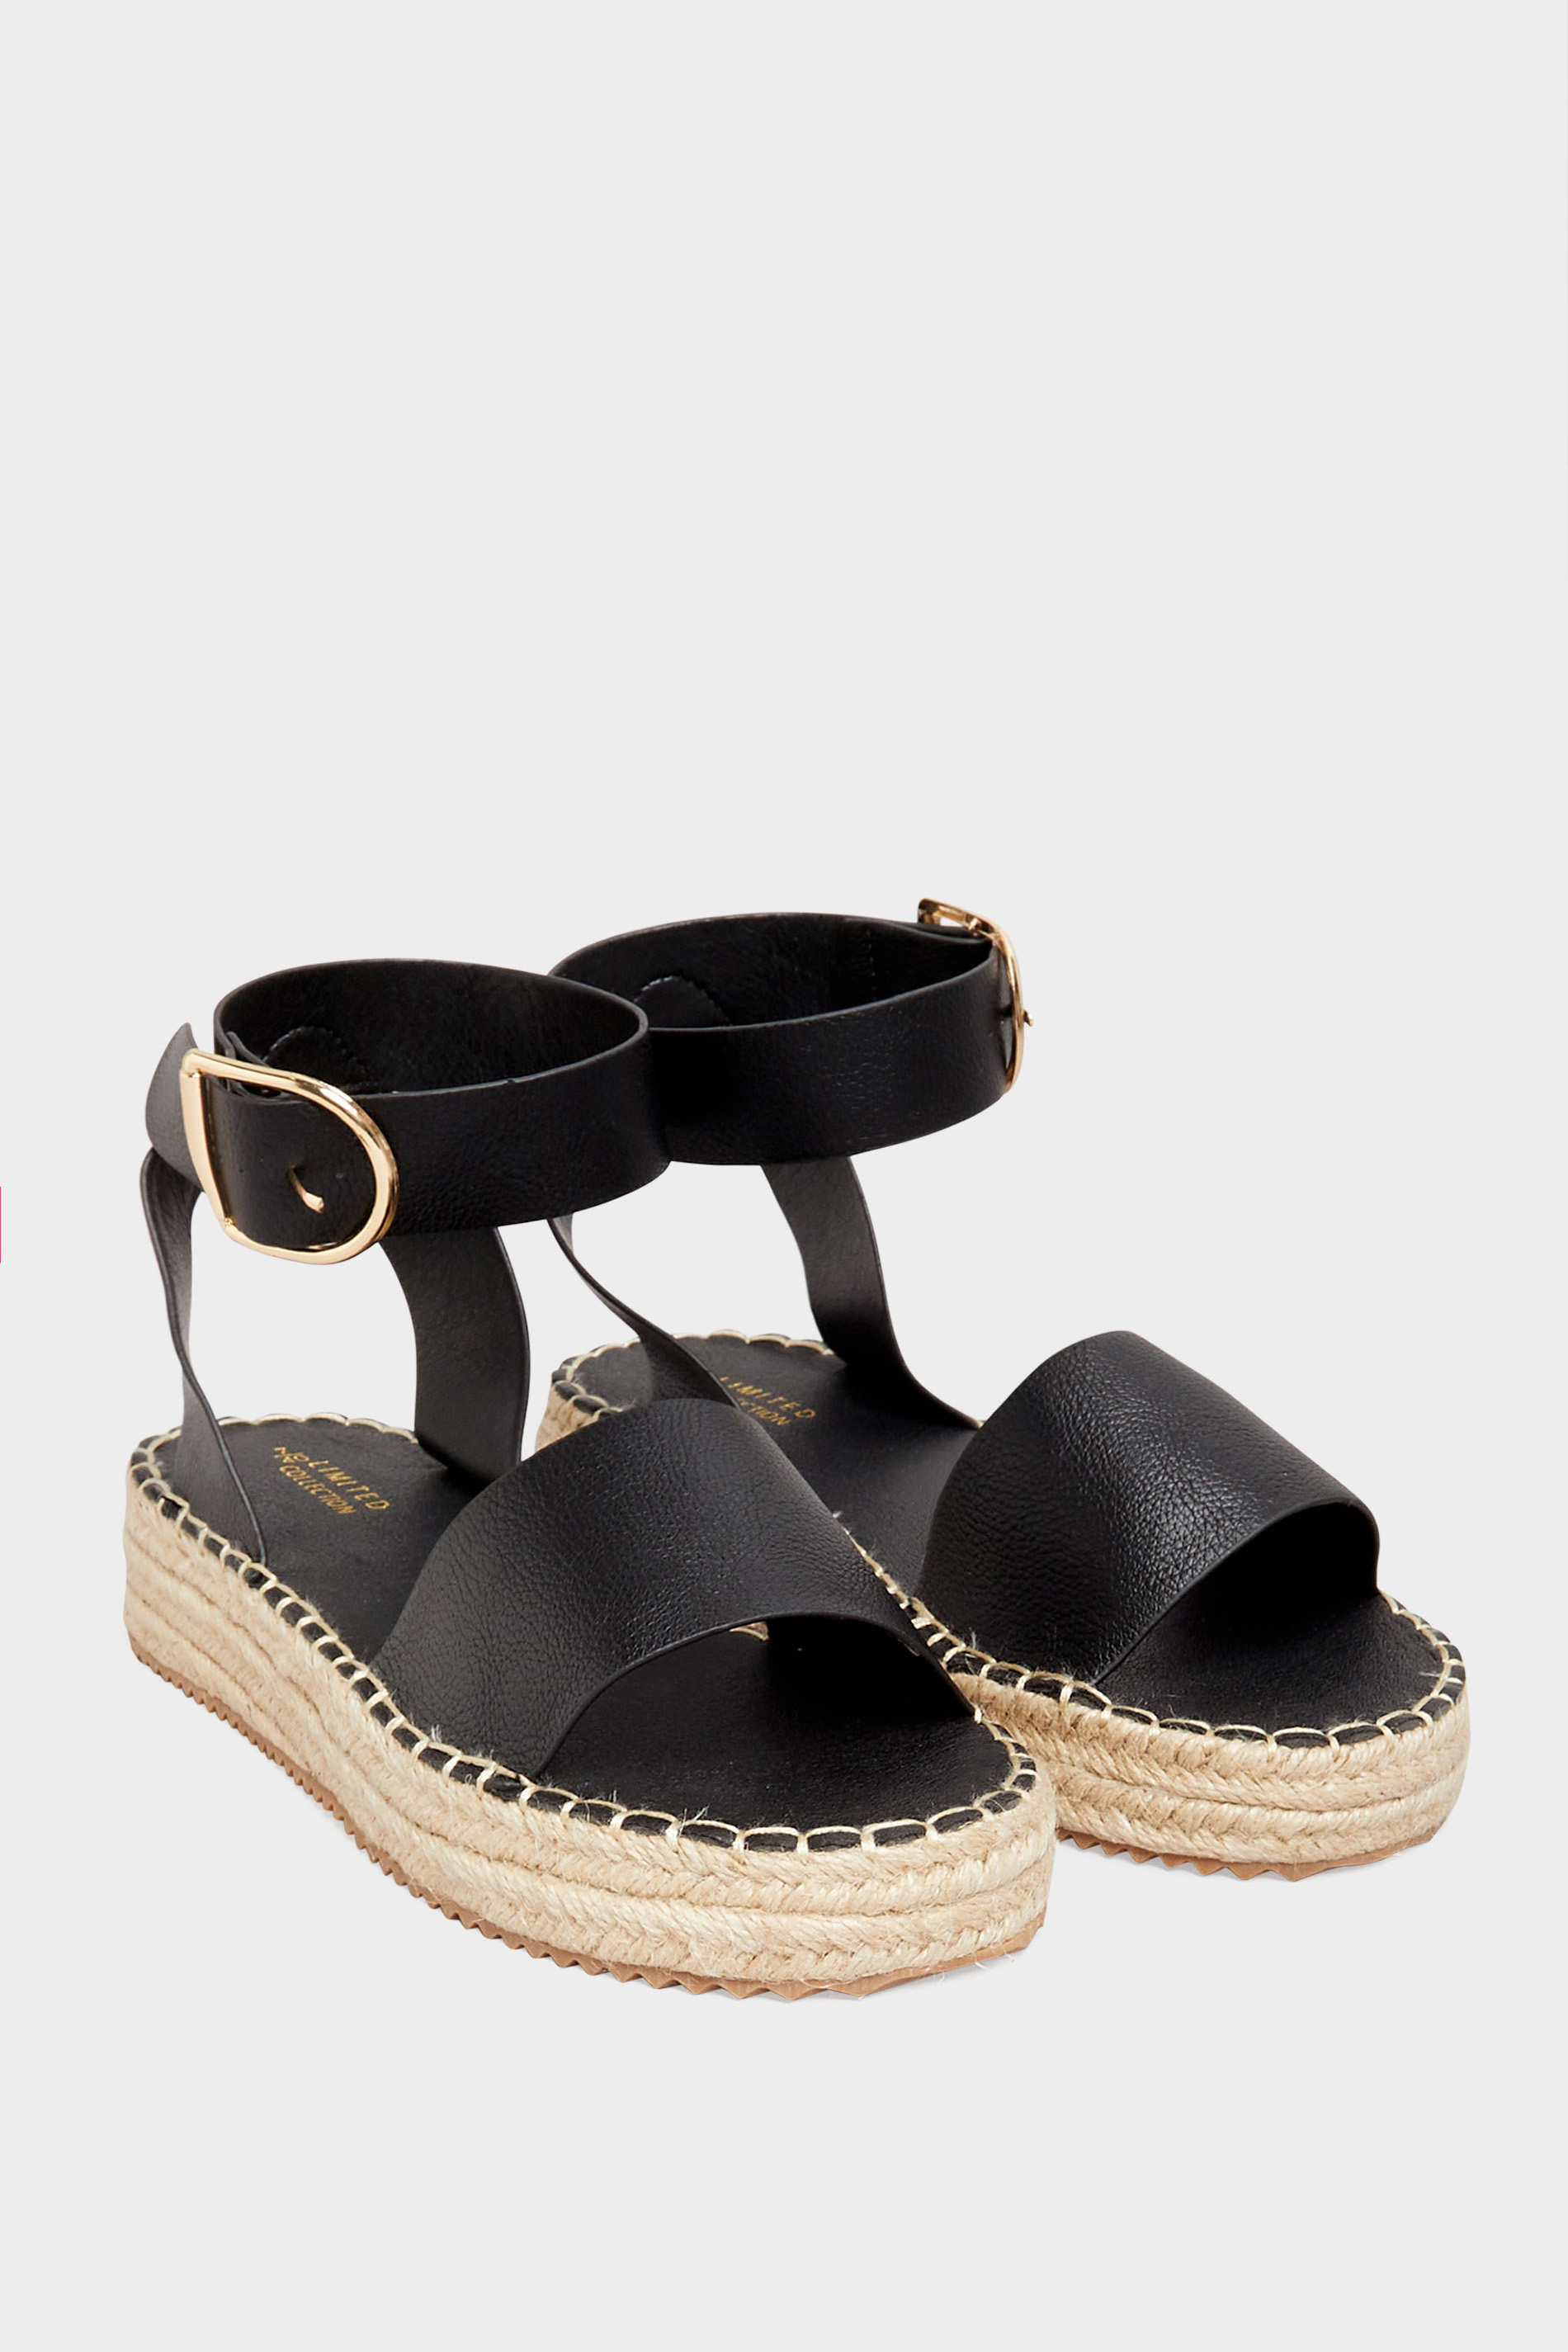 Plus Size Black Flatform Espadrilles In Wide E Fit & Extra Wide EEE Fit | Yours Clothing 2